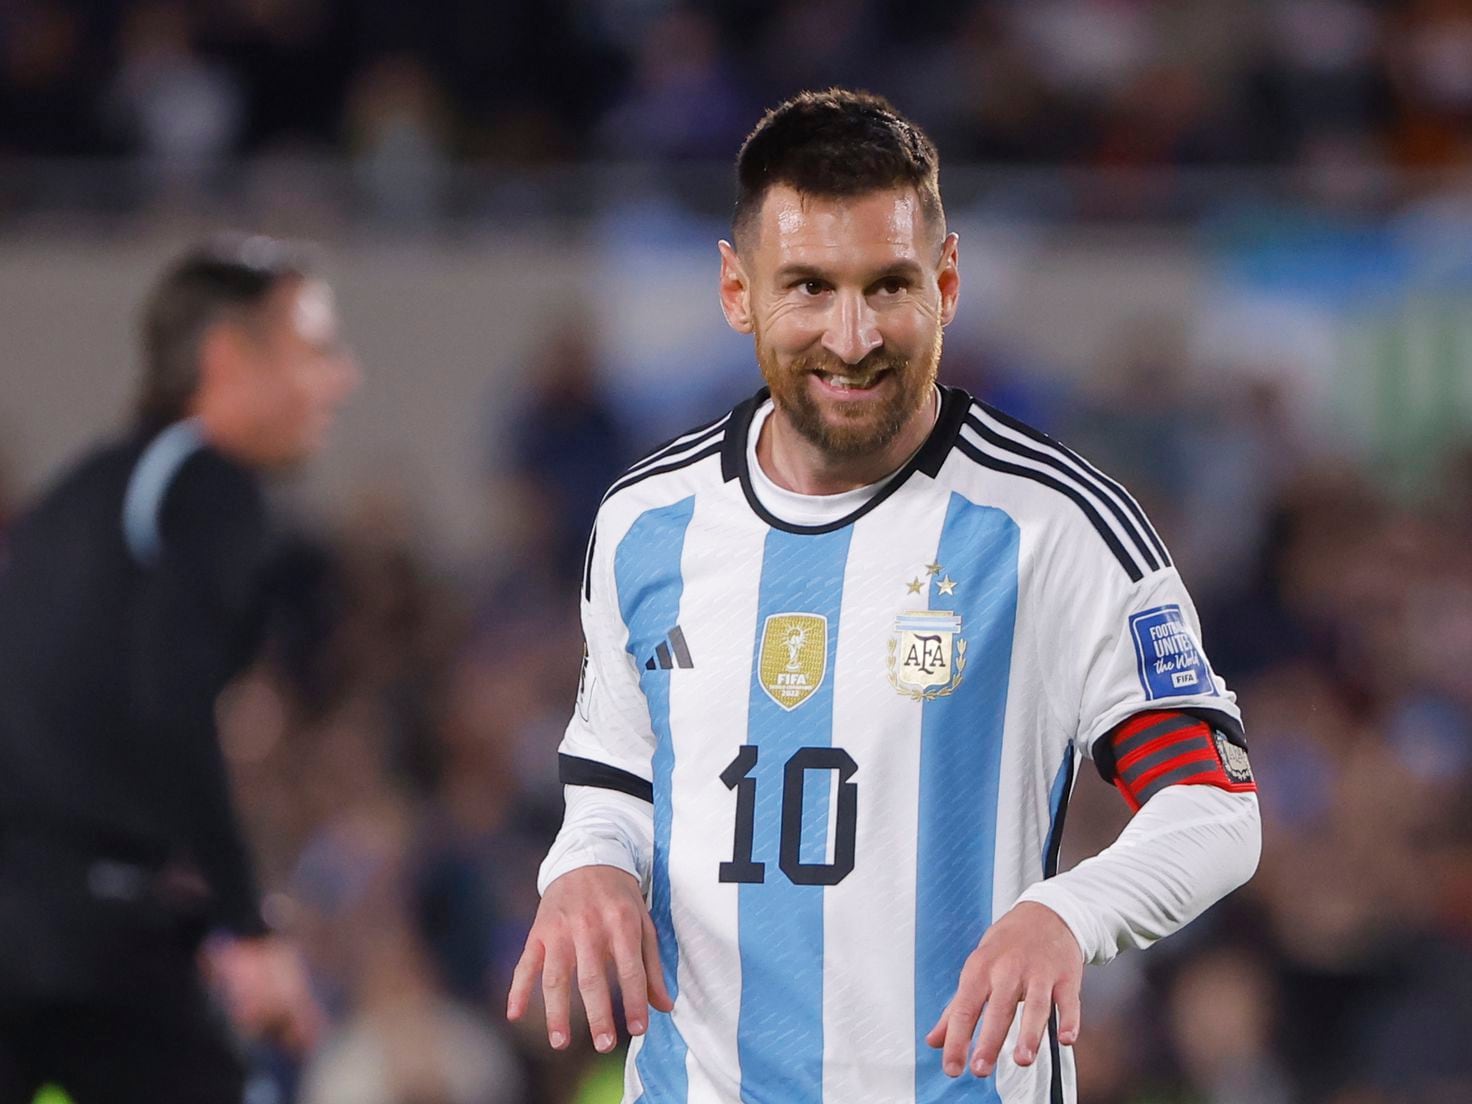 Argentina's Lionel Messi says he wants to continue 'living a few